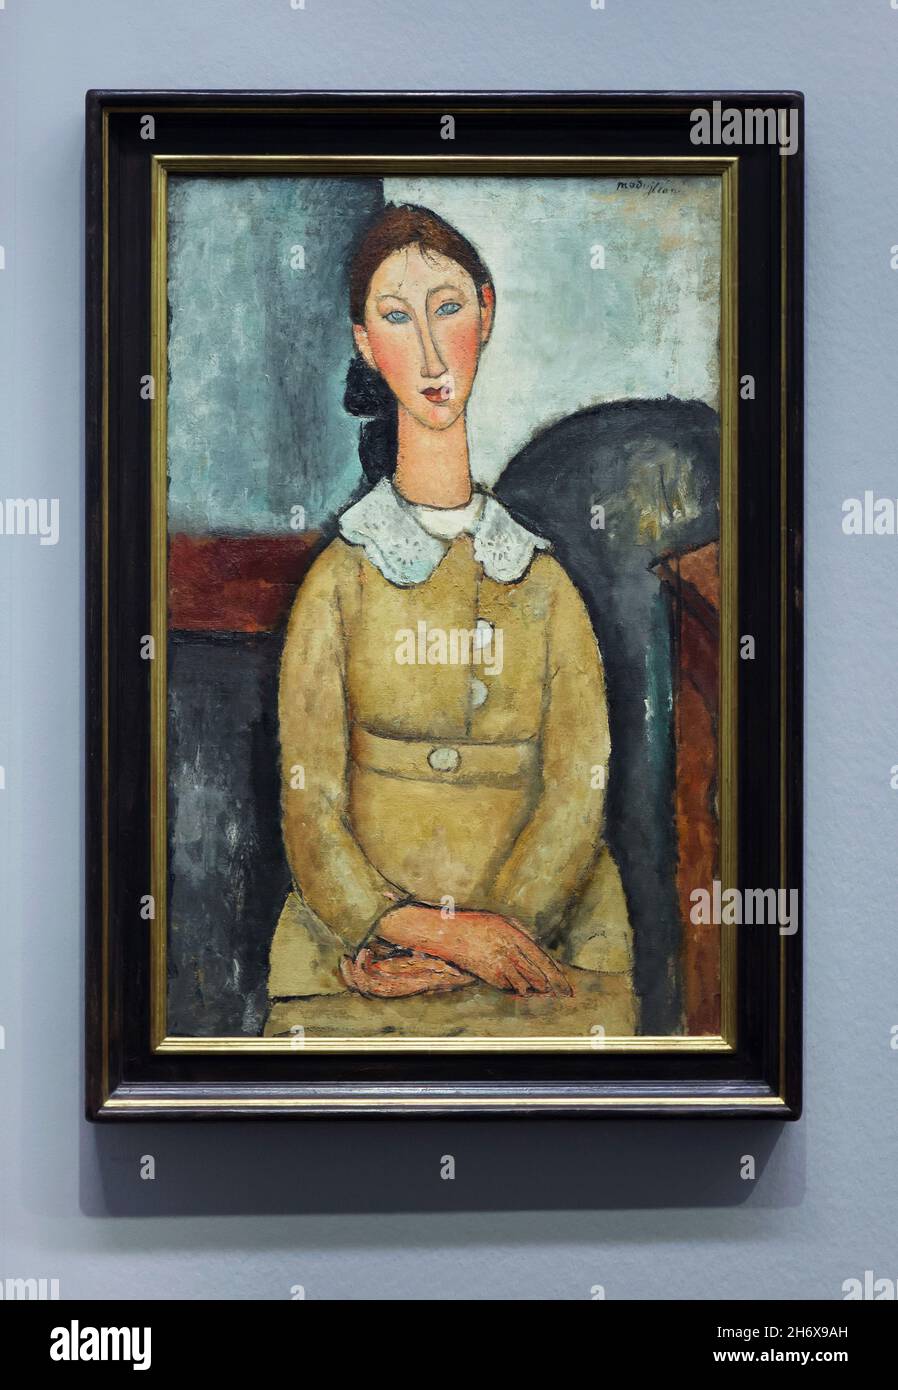 Painting 'Girl in a Yellow Dress' by Italian modernist painter Amedeo Modigliani (1917) on display at his retrospective exhibition in the Albertina Museum in Vienna, Austria. The exhibition marking the centenary of artist's death runs till 9 January 2022. Stock Photo